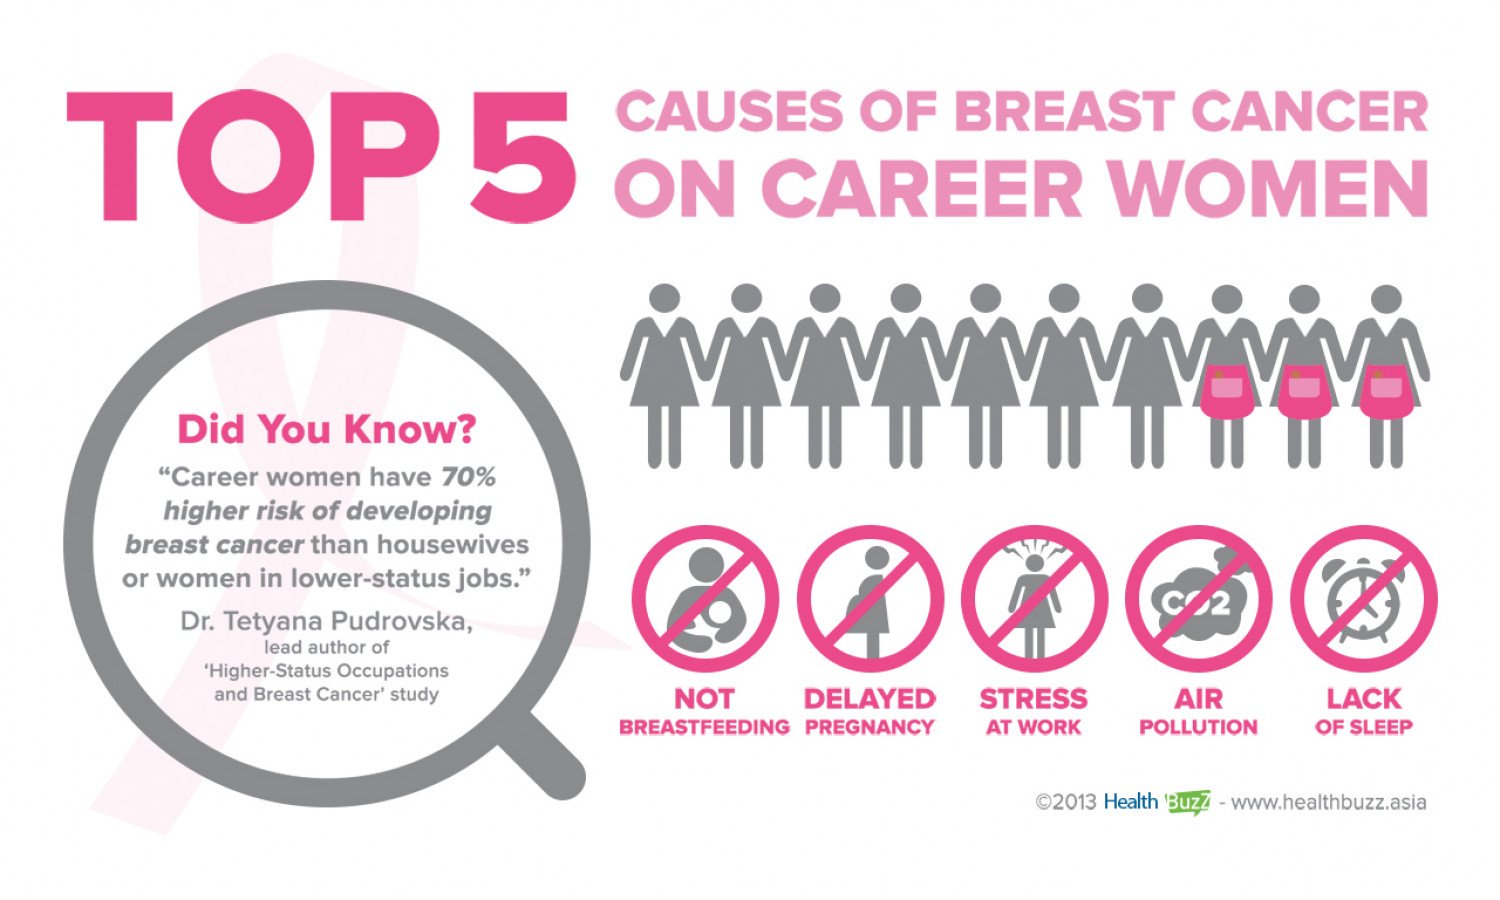 Top 5 Causes of Breast Cancer on Career Women